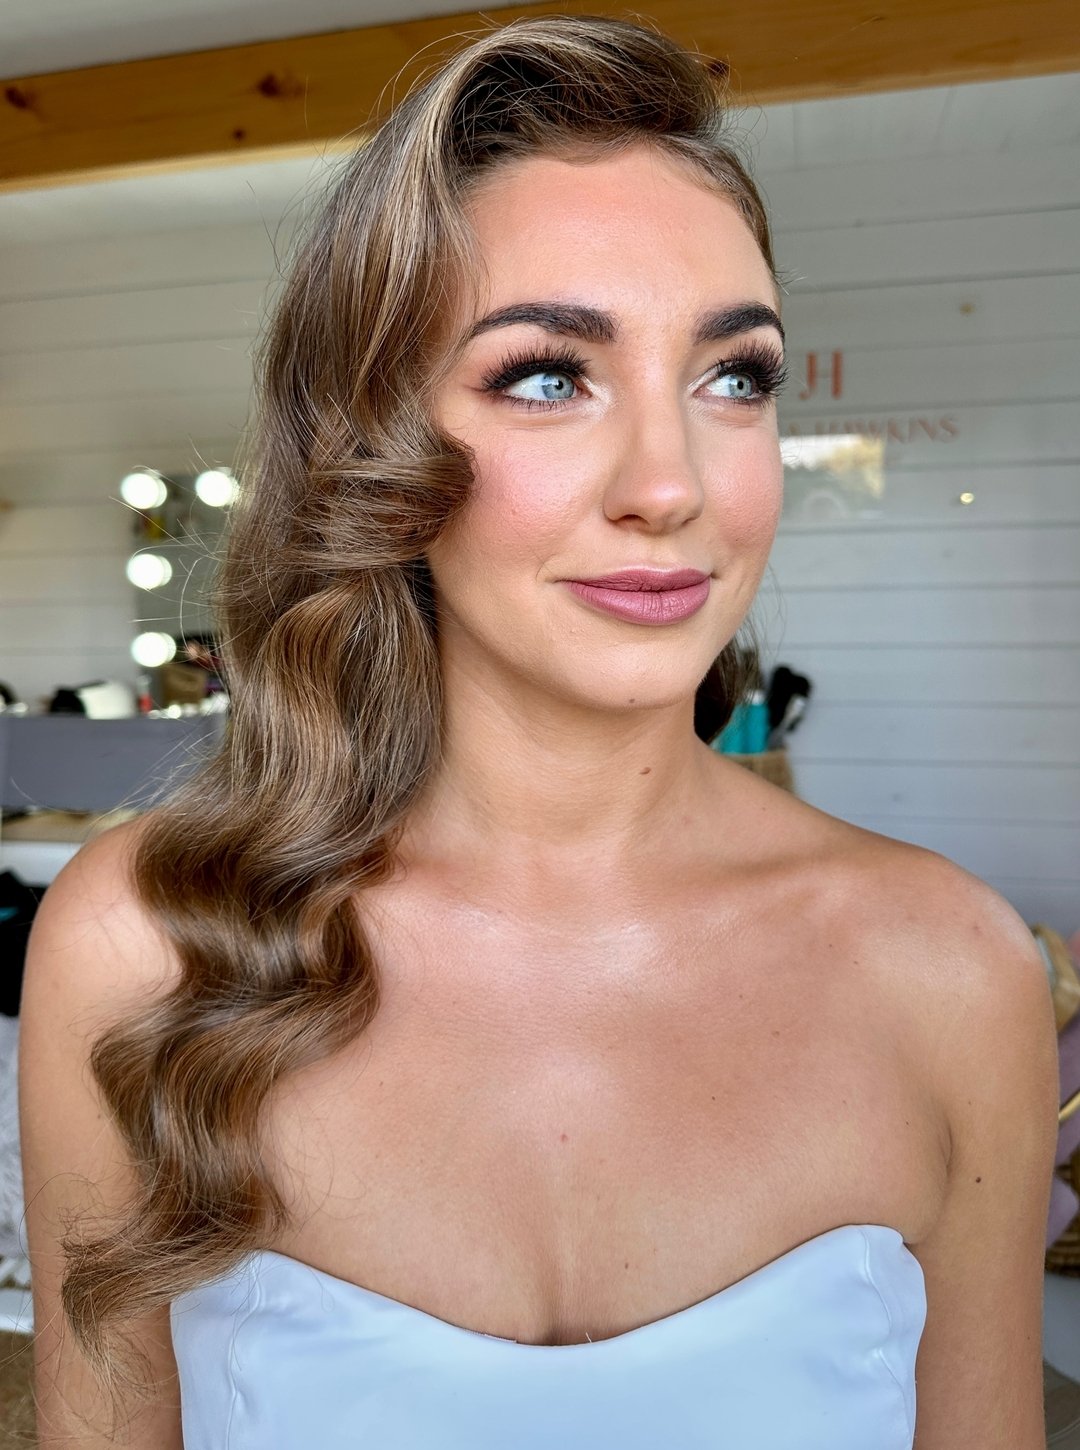 ✨ My Signature Bridal Glow ✨​​​​​​​​
​​​​​​​​
Radiant and glowing skin with lots of dreamy skincare layered underneath. Makeup designed to elevate your natural beauty, the result is an elegant modern makeup look. ​​​​​​​​
​​​​​​​​
I want you to feel 